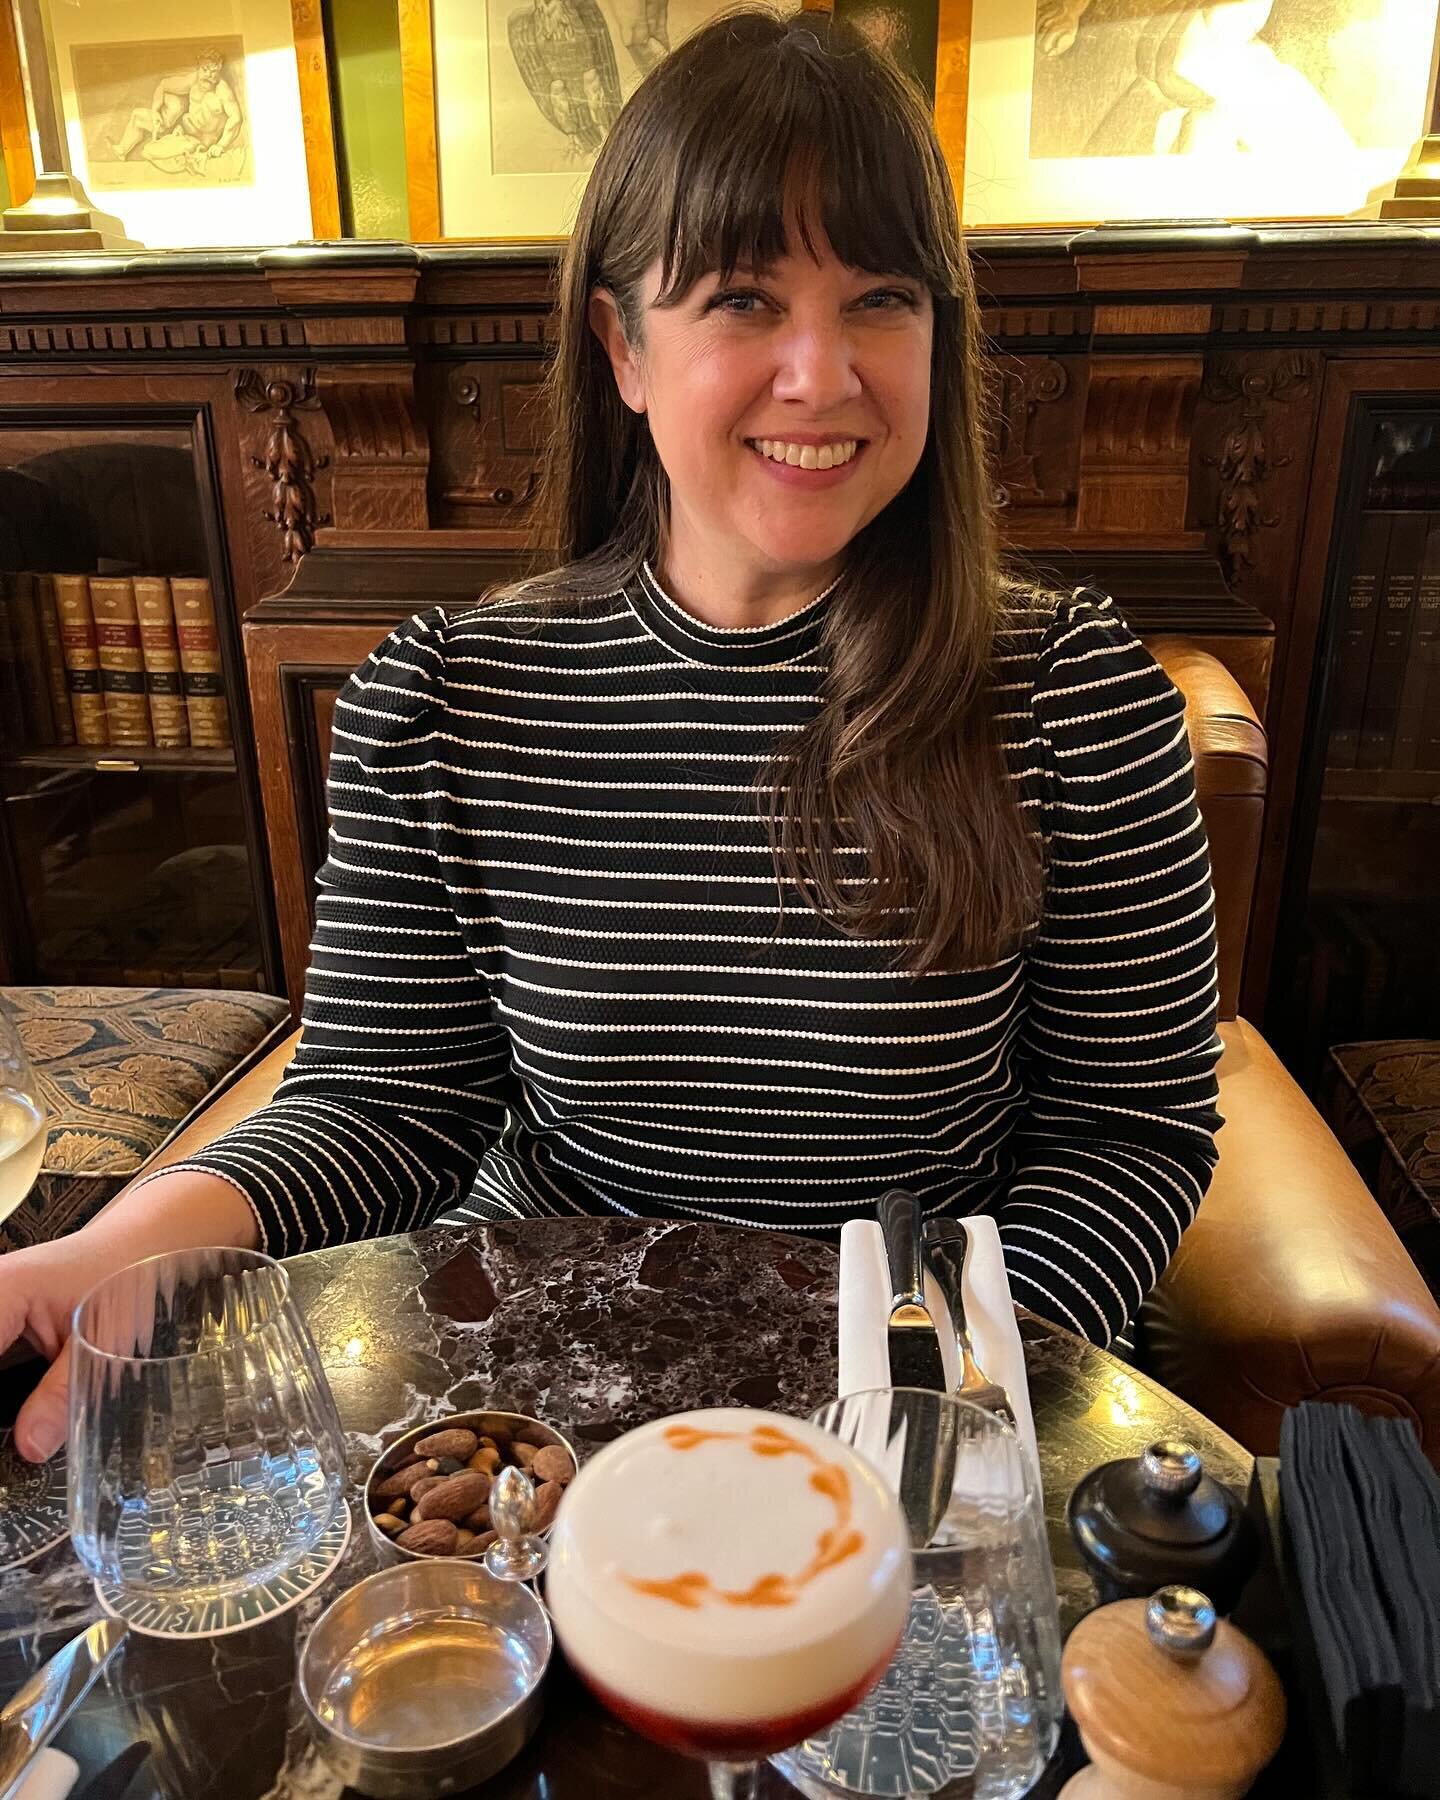 I have so many things to share about my week in Paris that I&rsquo;m finding it hard to know where to begin. It was all Dash and no Ramble, I can tell you!

Enjoy this sneak peek of my trip&mdash;amuse-bouche, if you will. And stay tuned for lots mor